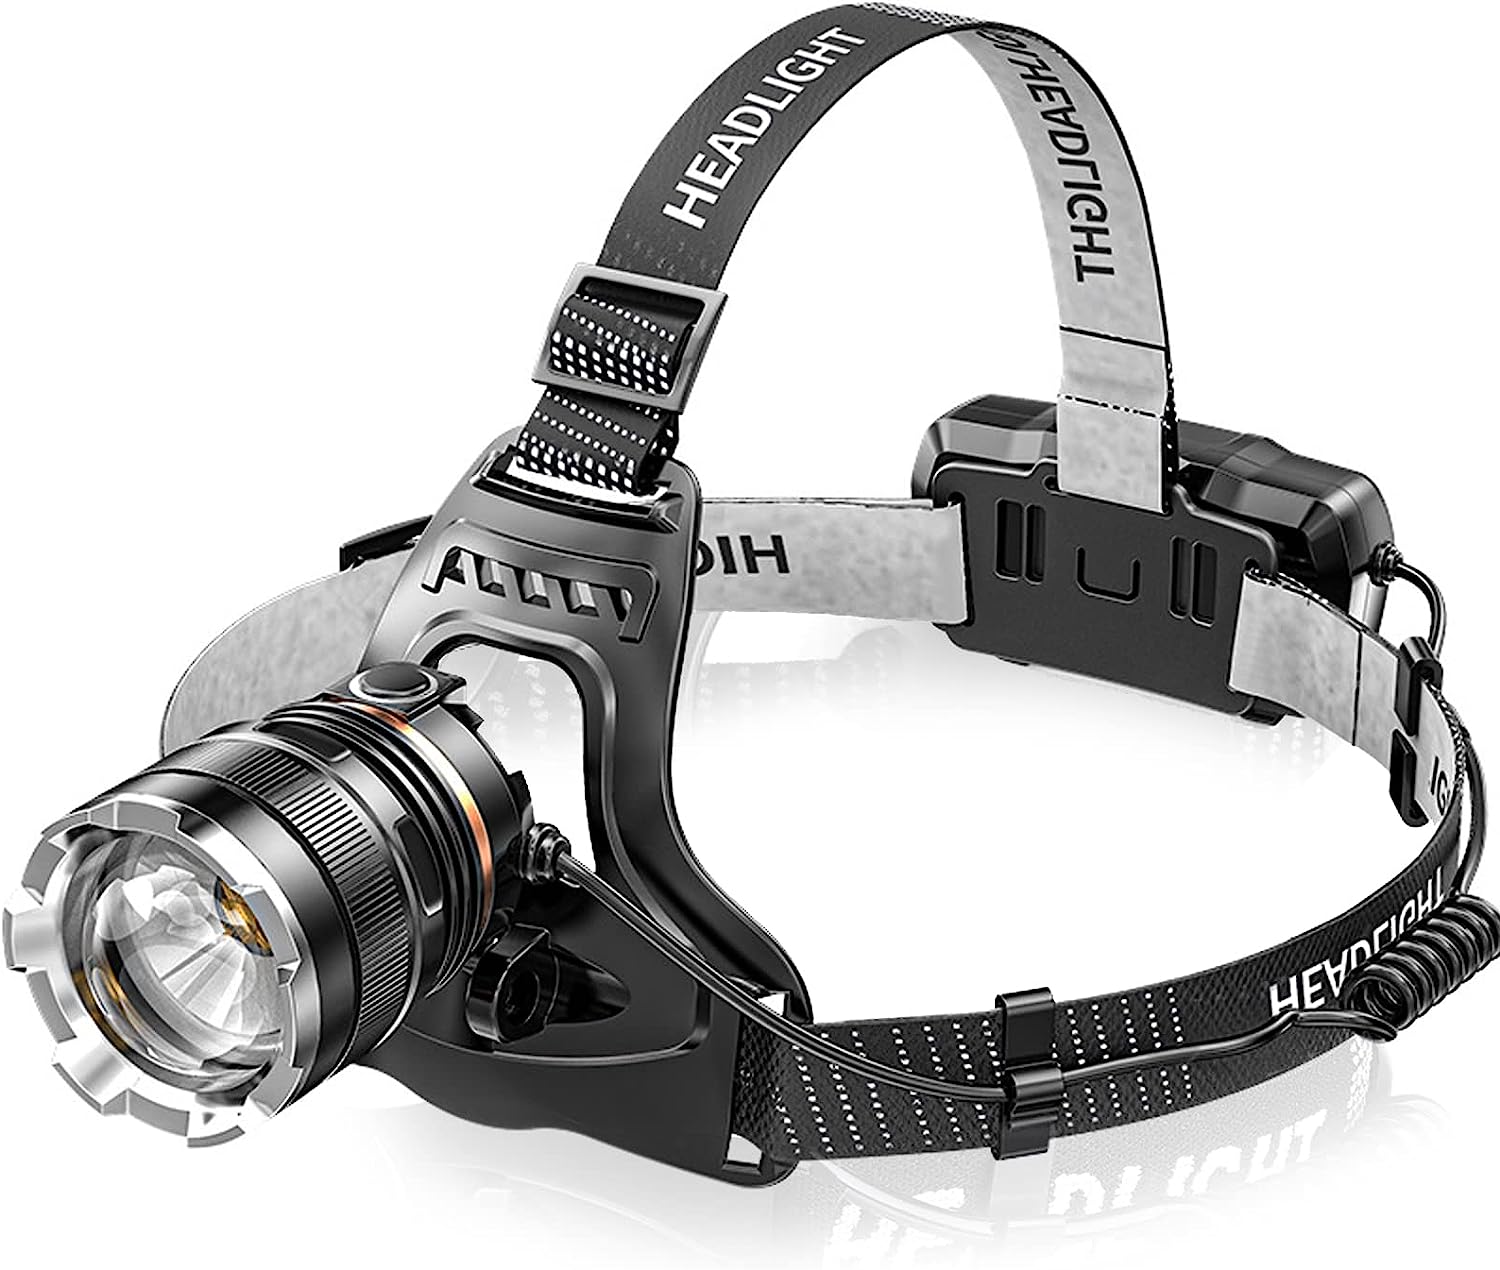 LED Rechargeable Headlamp, Super Bright 50,000 Lumens, 6 Modes LED